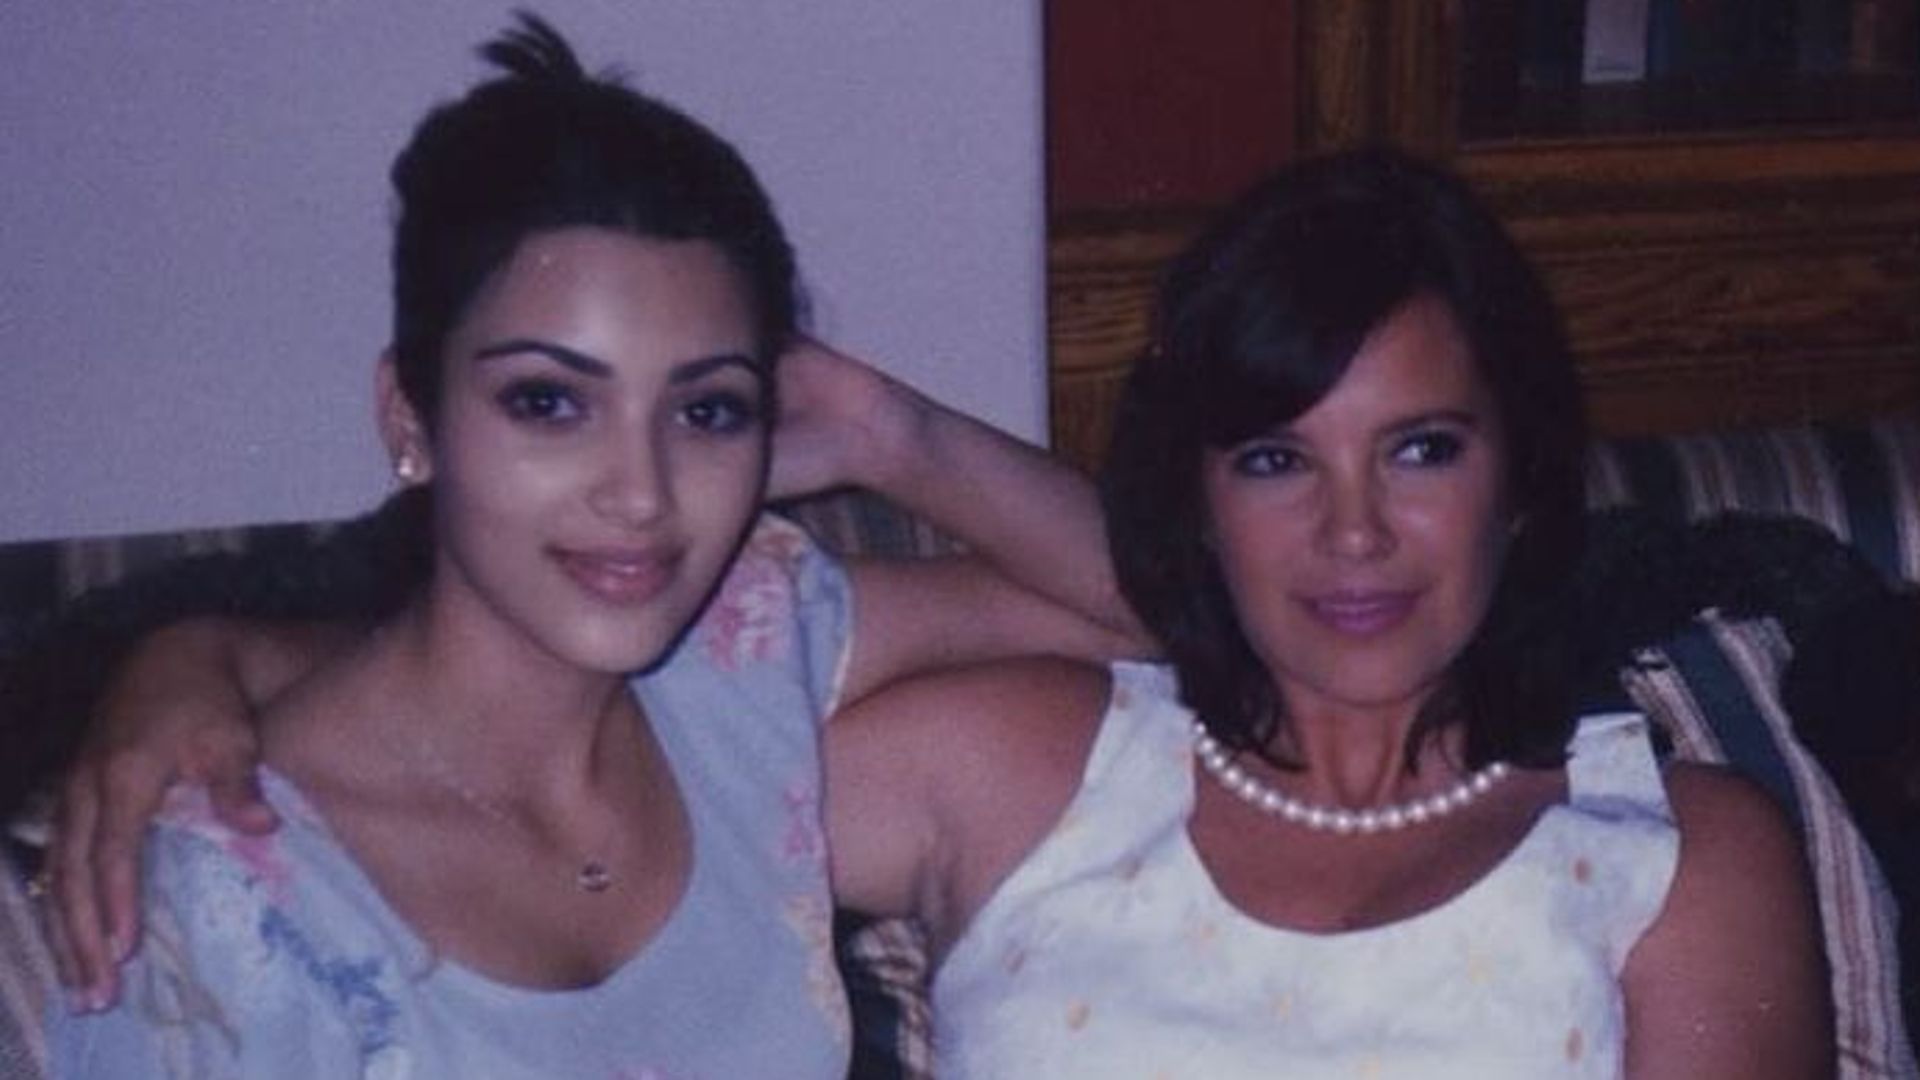 Kim Kardashian breaks silence on 'unexpected' death of her aunt Karen  Houghton with emotional message